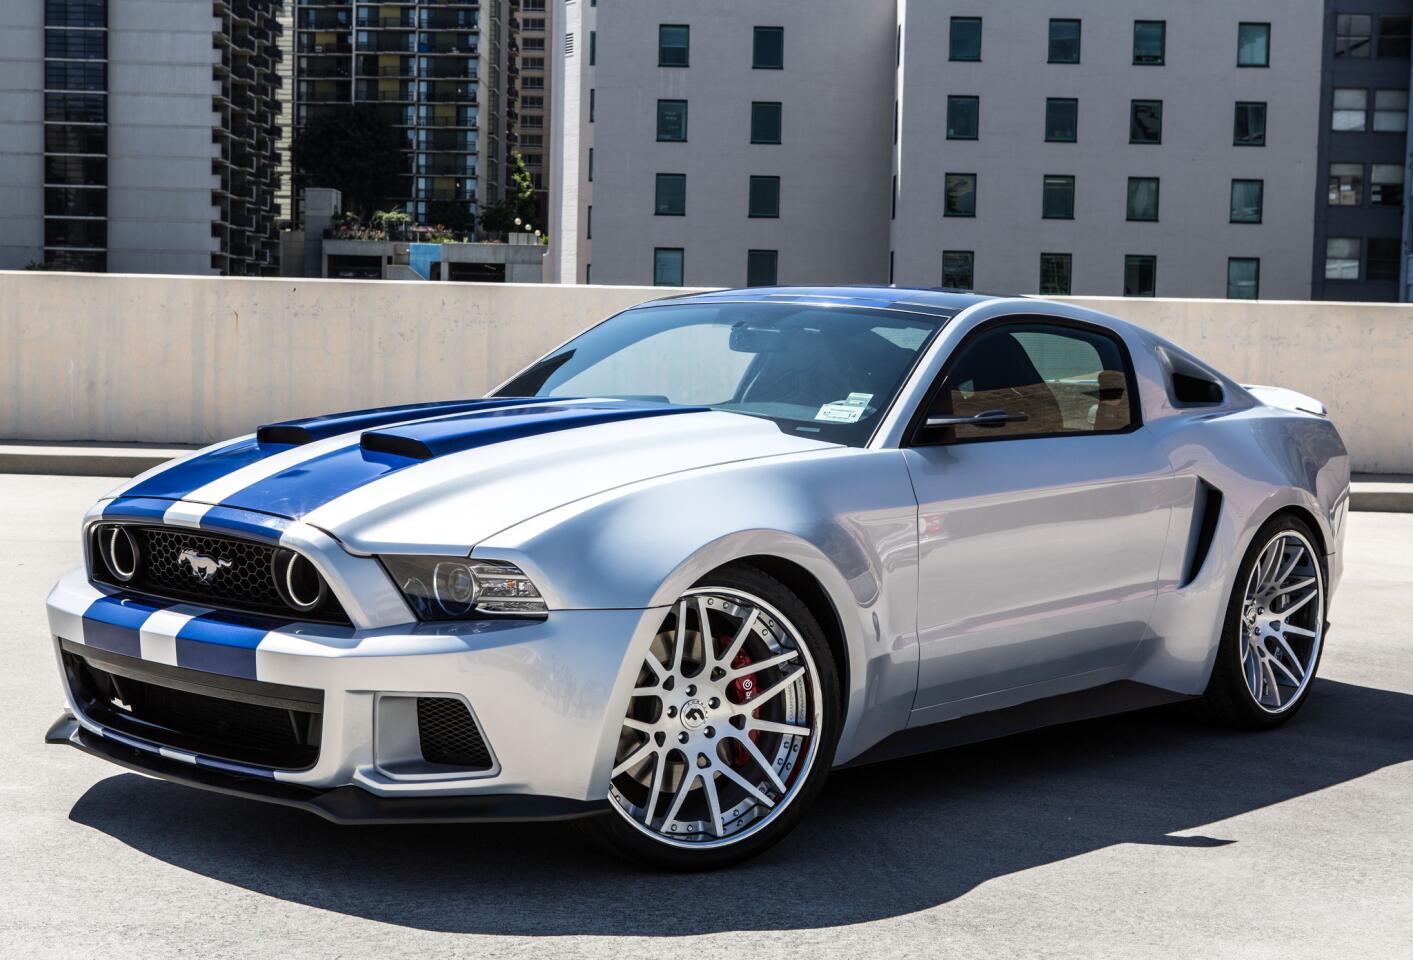 This custom Ford Mustang will be featured prominently in the 2014 "Need for Speed" film, Ford and DreamWorks announced on Monday.